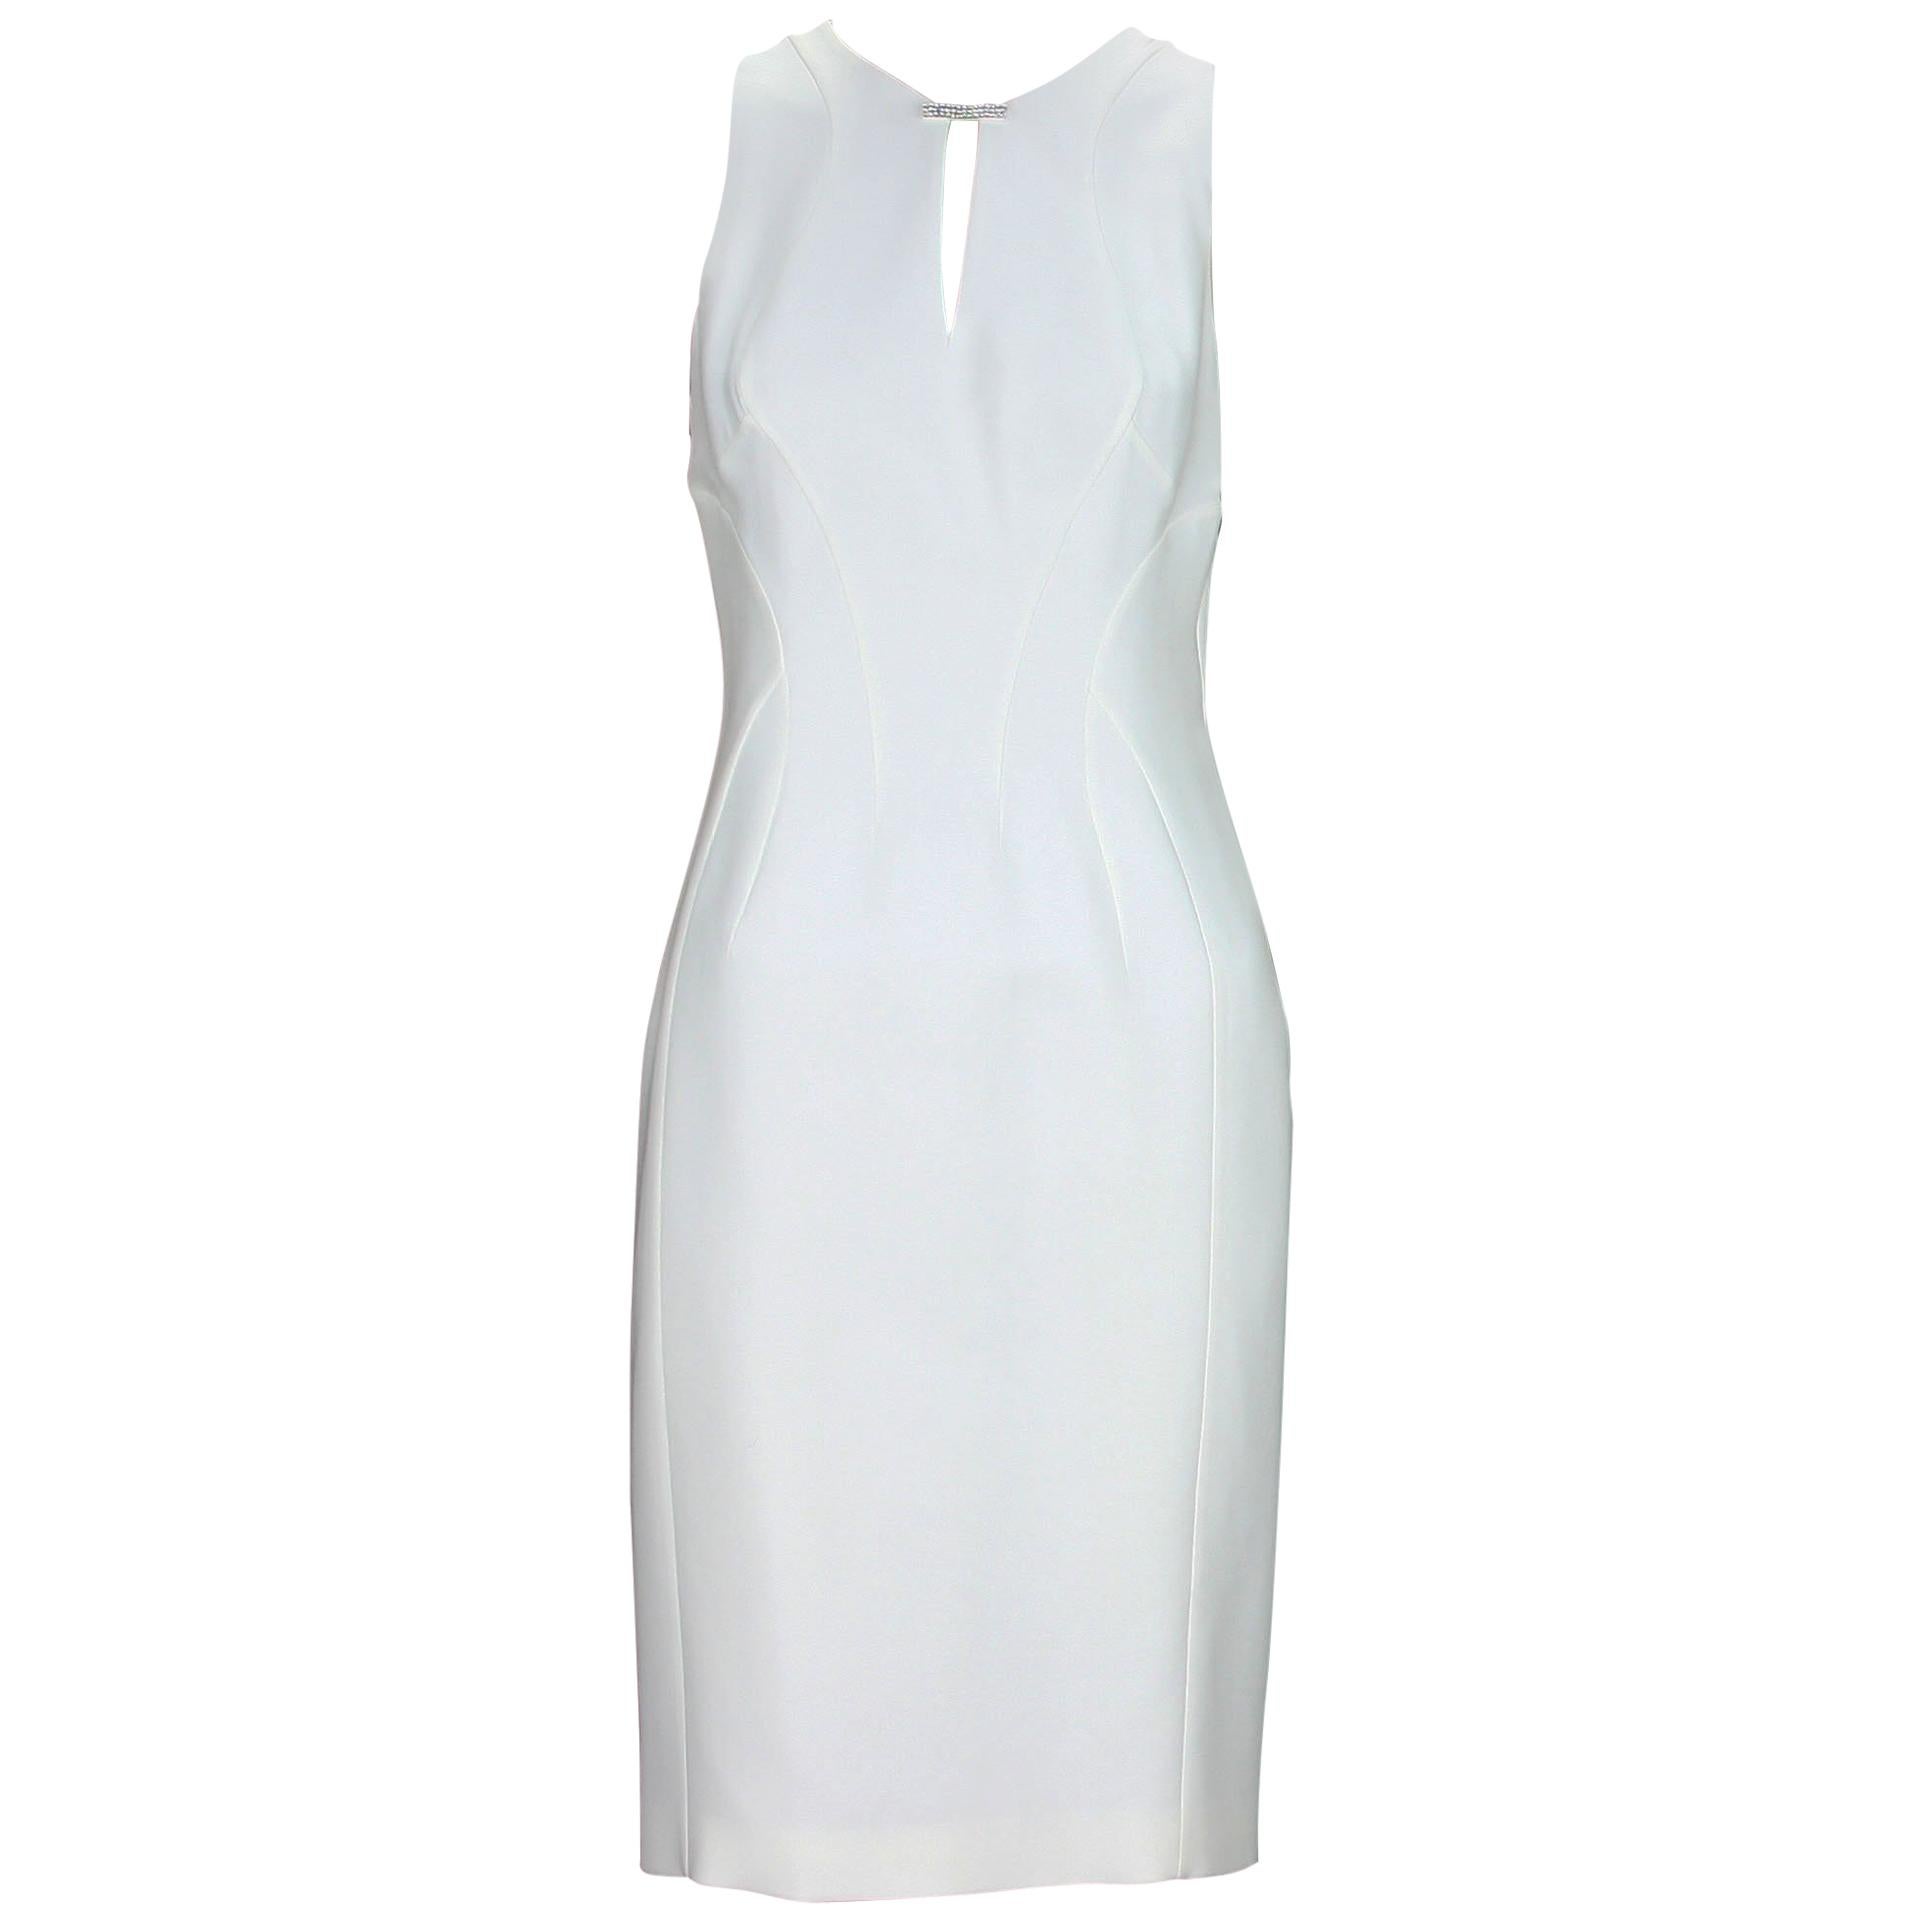 New Versace White Silk Cocktail Dress with Swarovski Crystals It 40 -US 6 For Sale